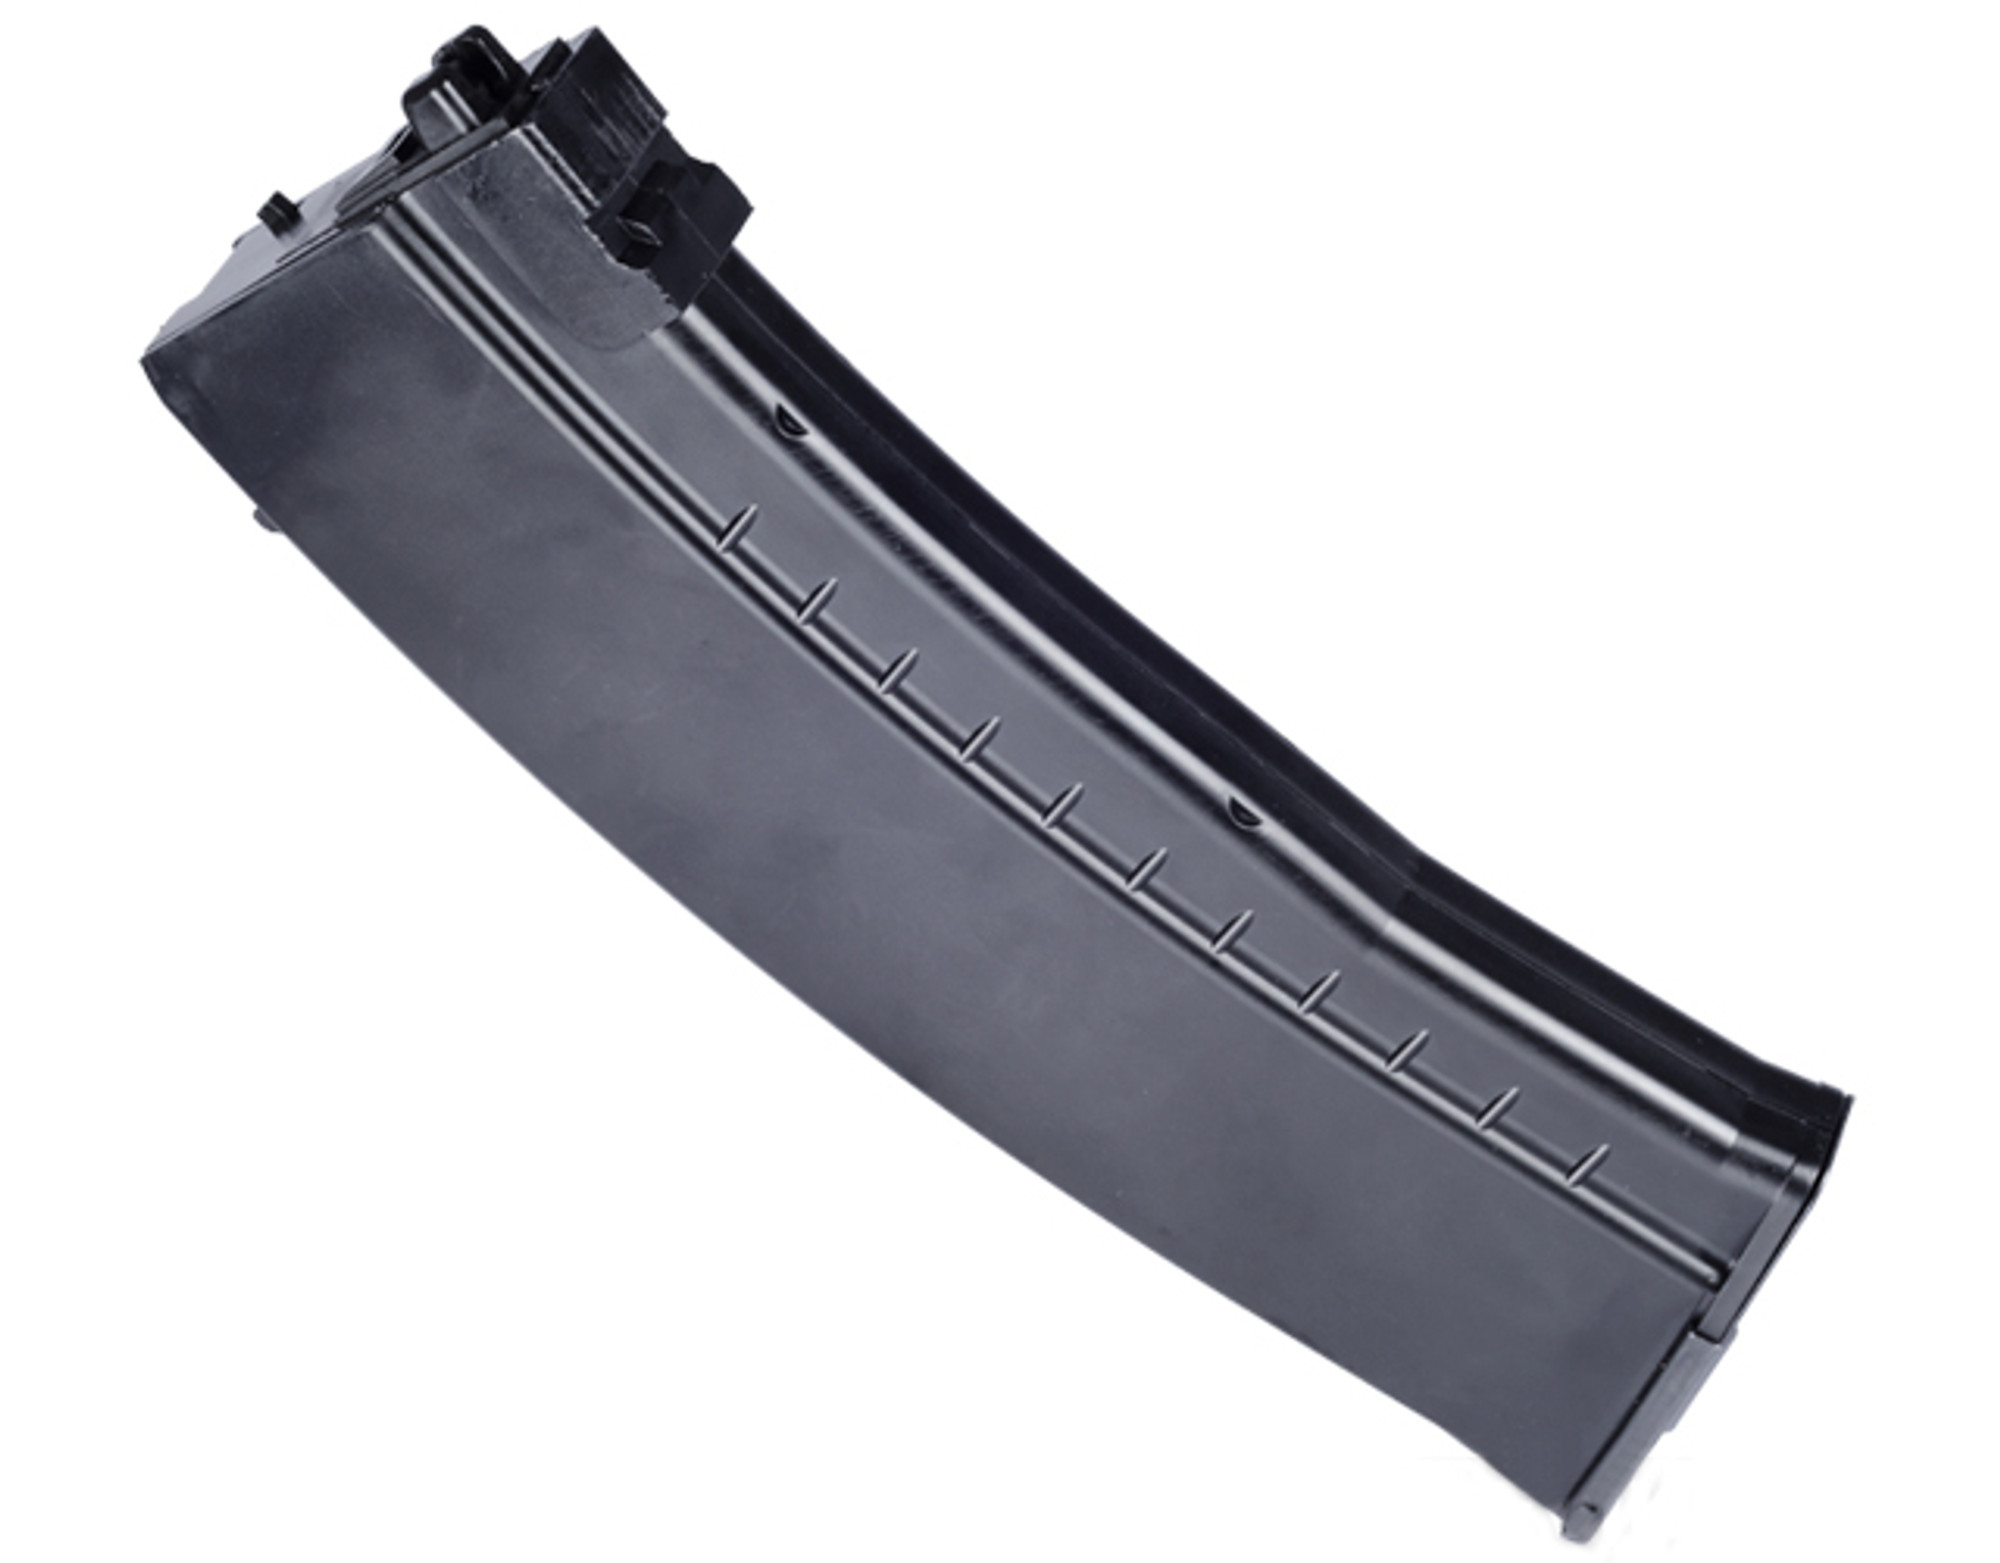 WE Spare Magazine for WE Airsoft AK GBB Rifle